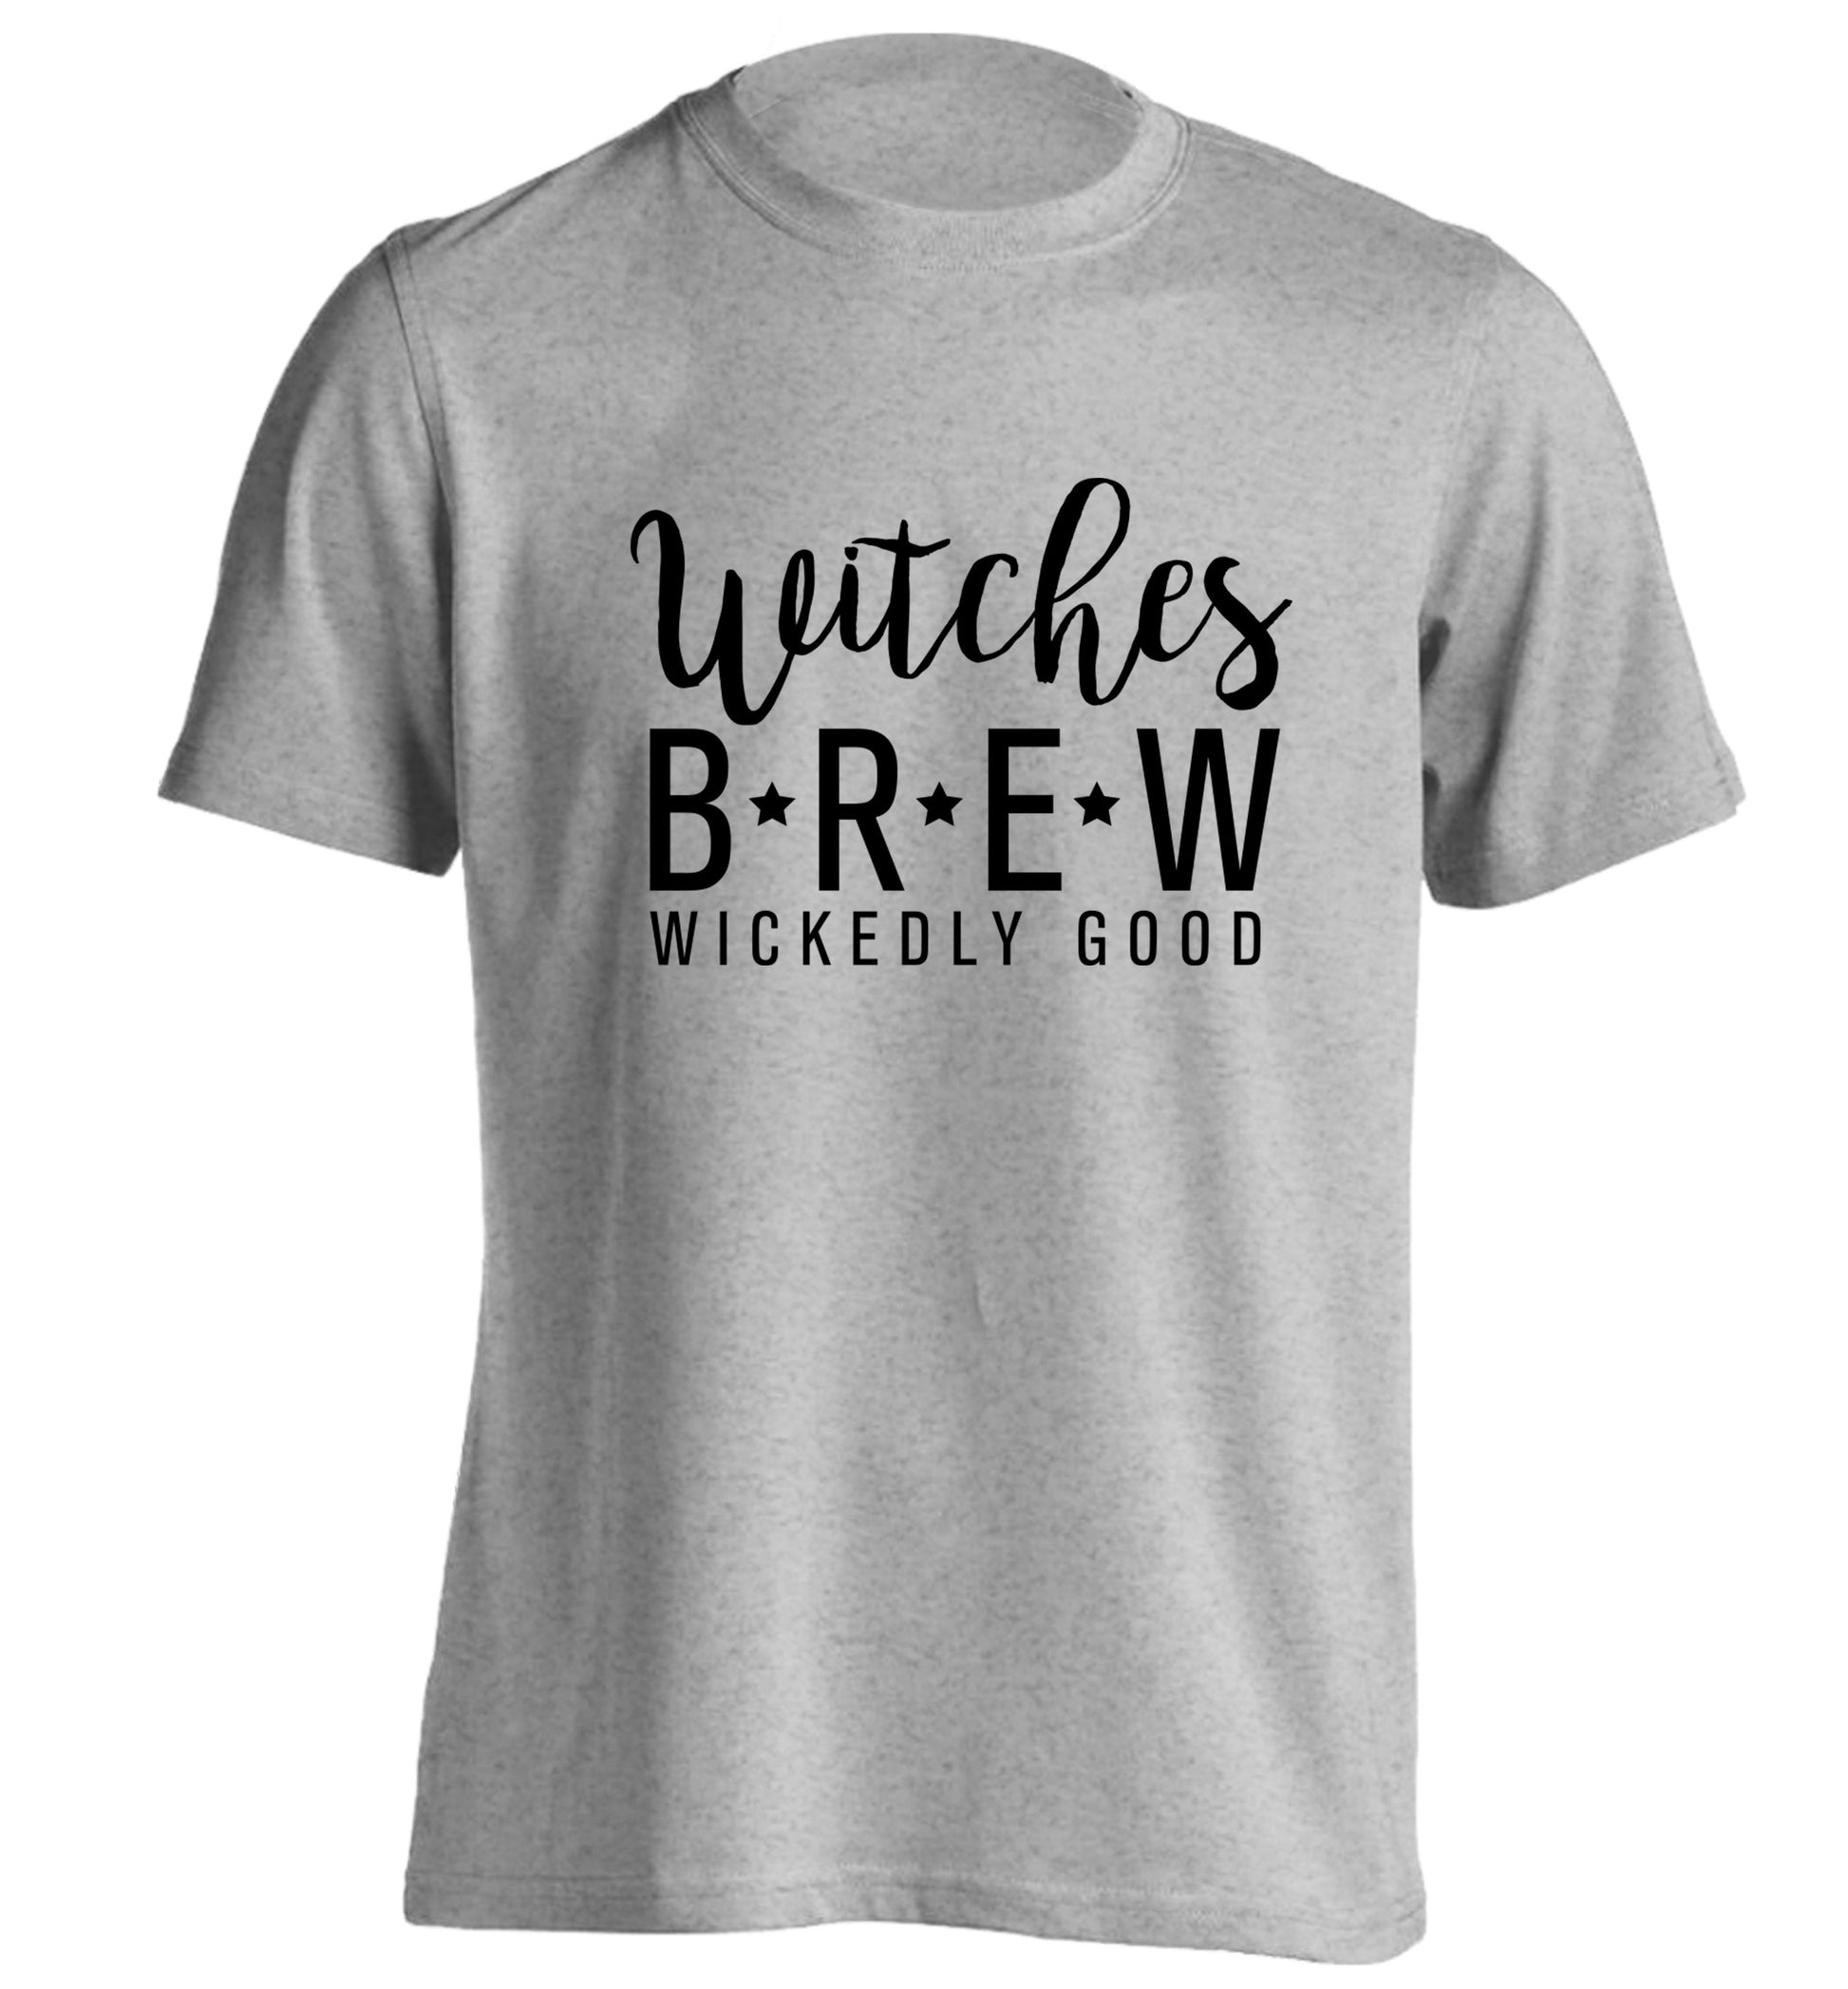 Witches Brew wickedly good adults unisex grey Tshirt 2XL